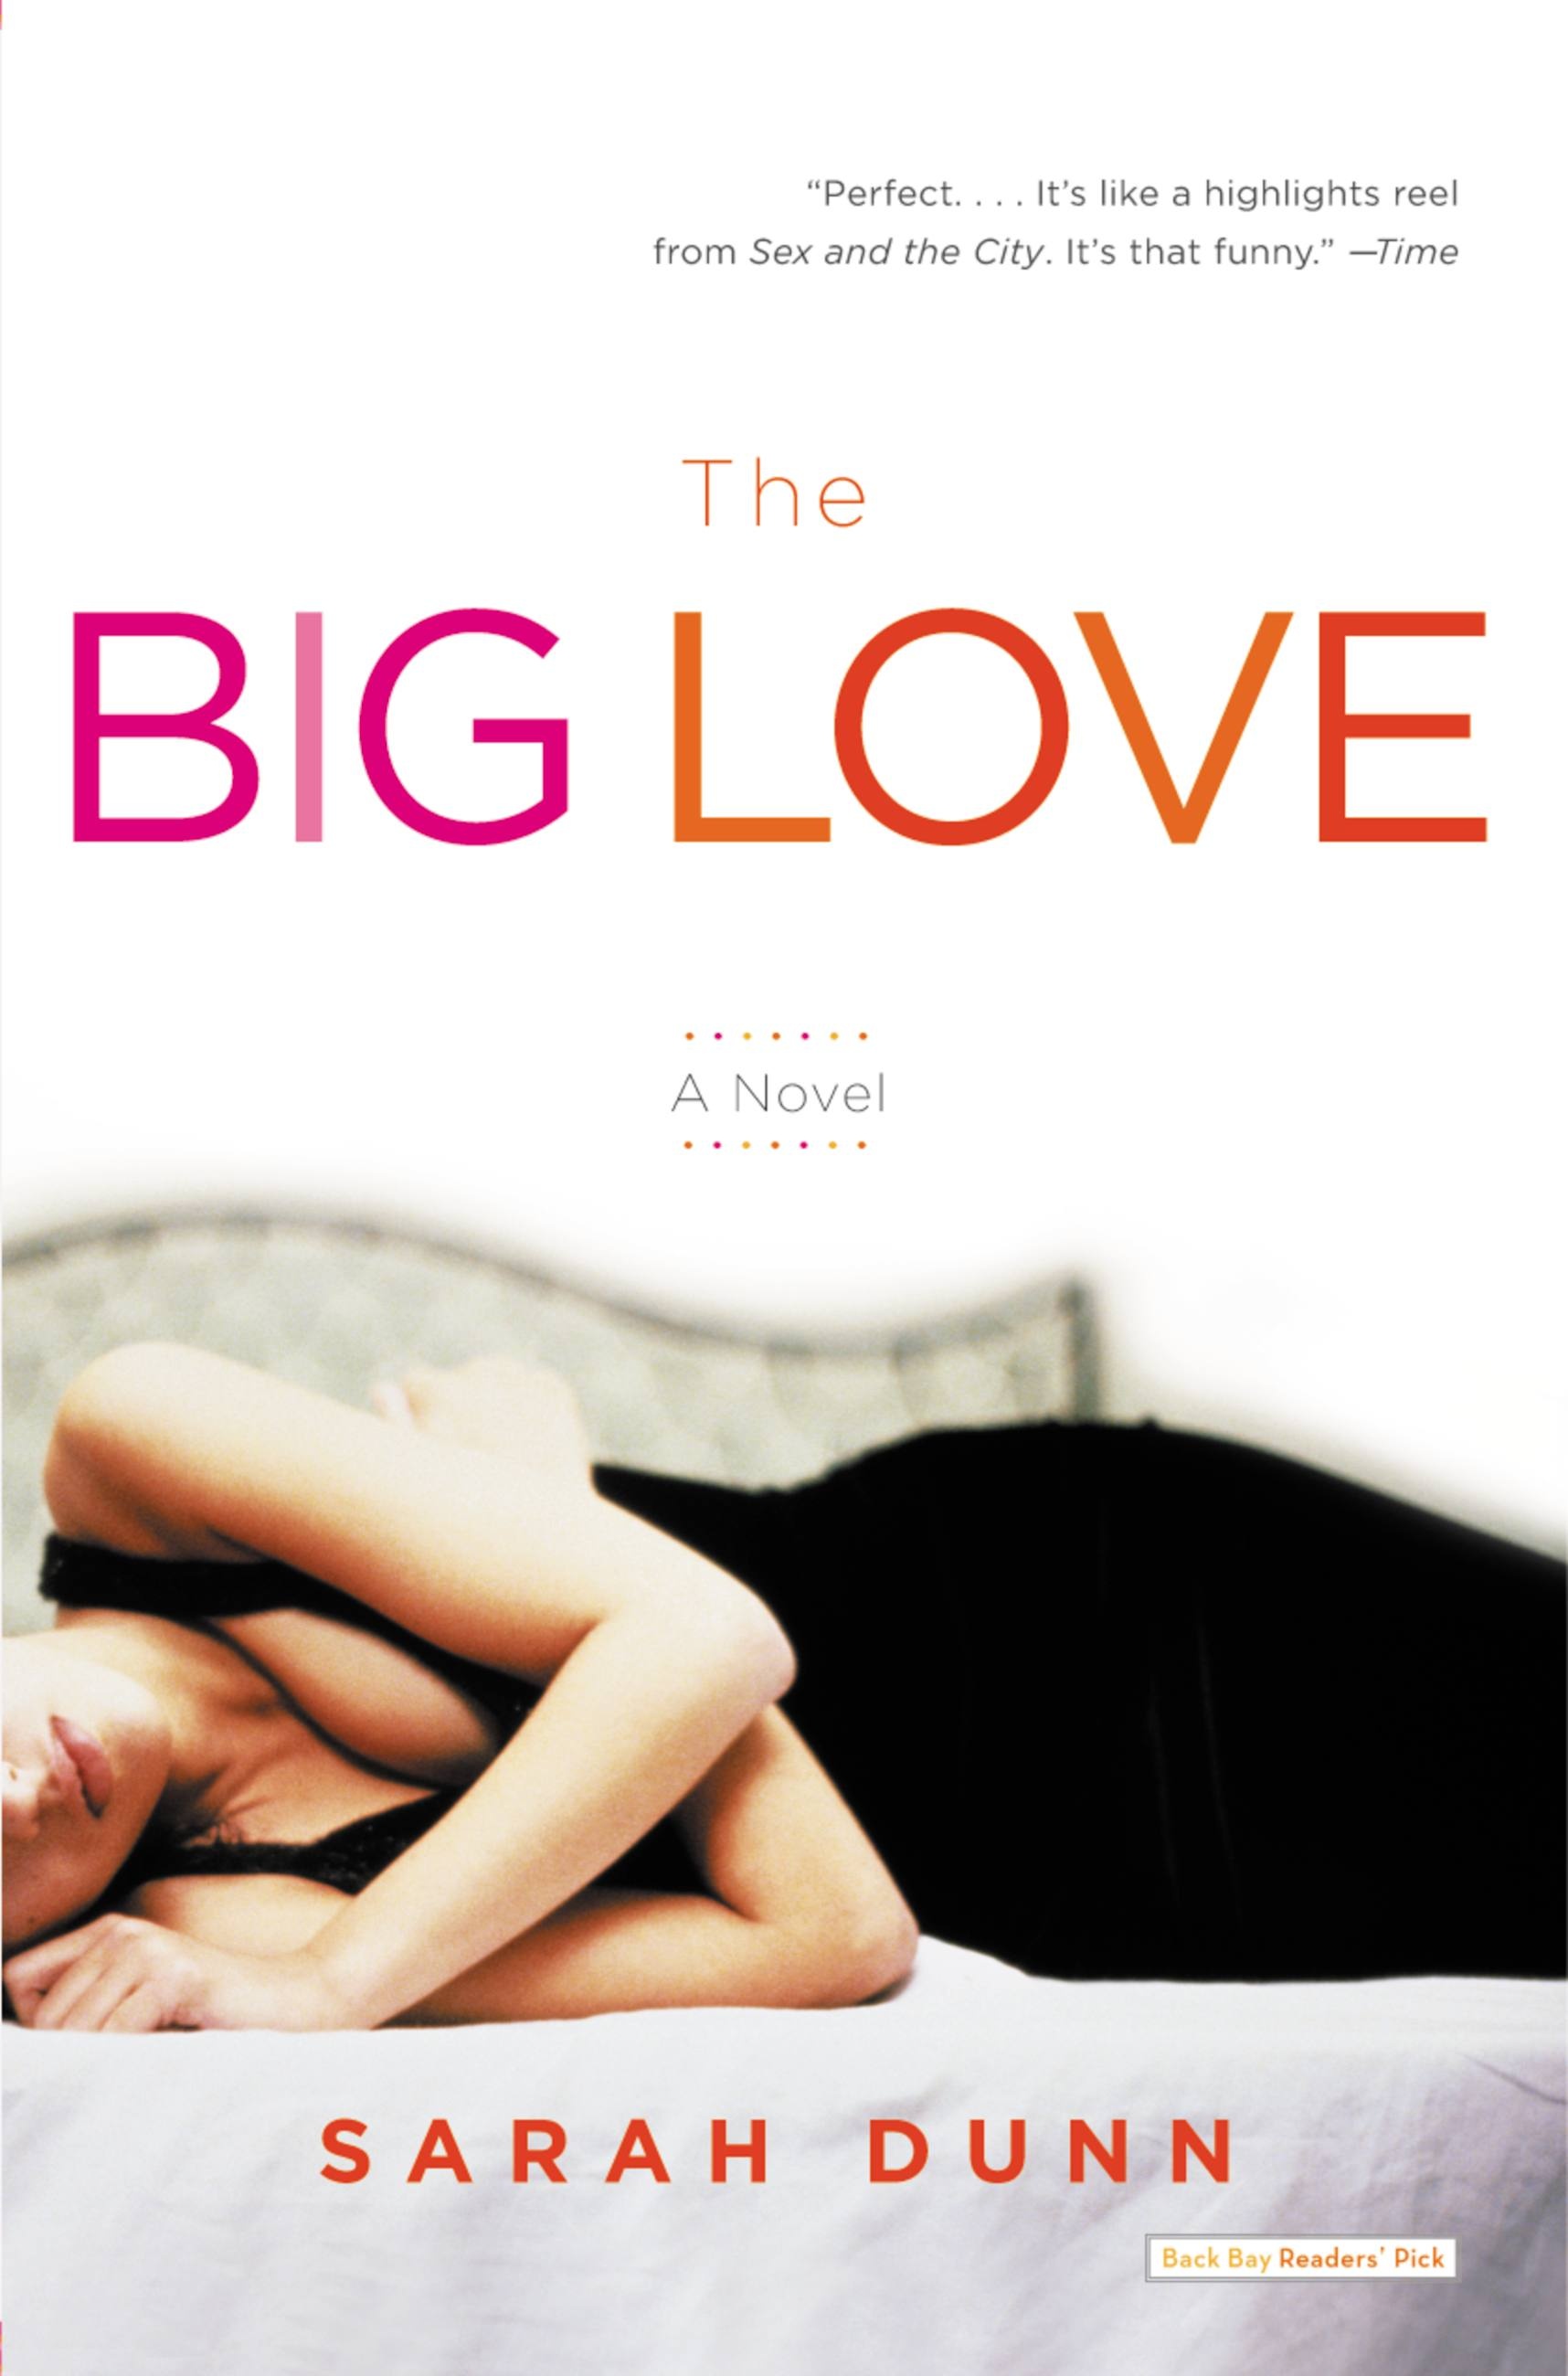 The Big Love by Sarah Dunn Hachette Book Group